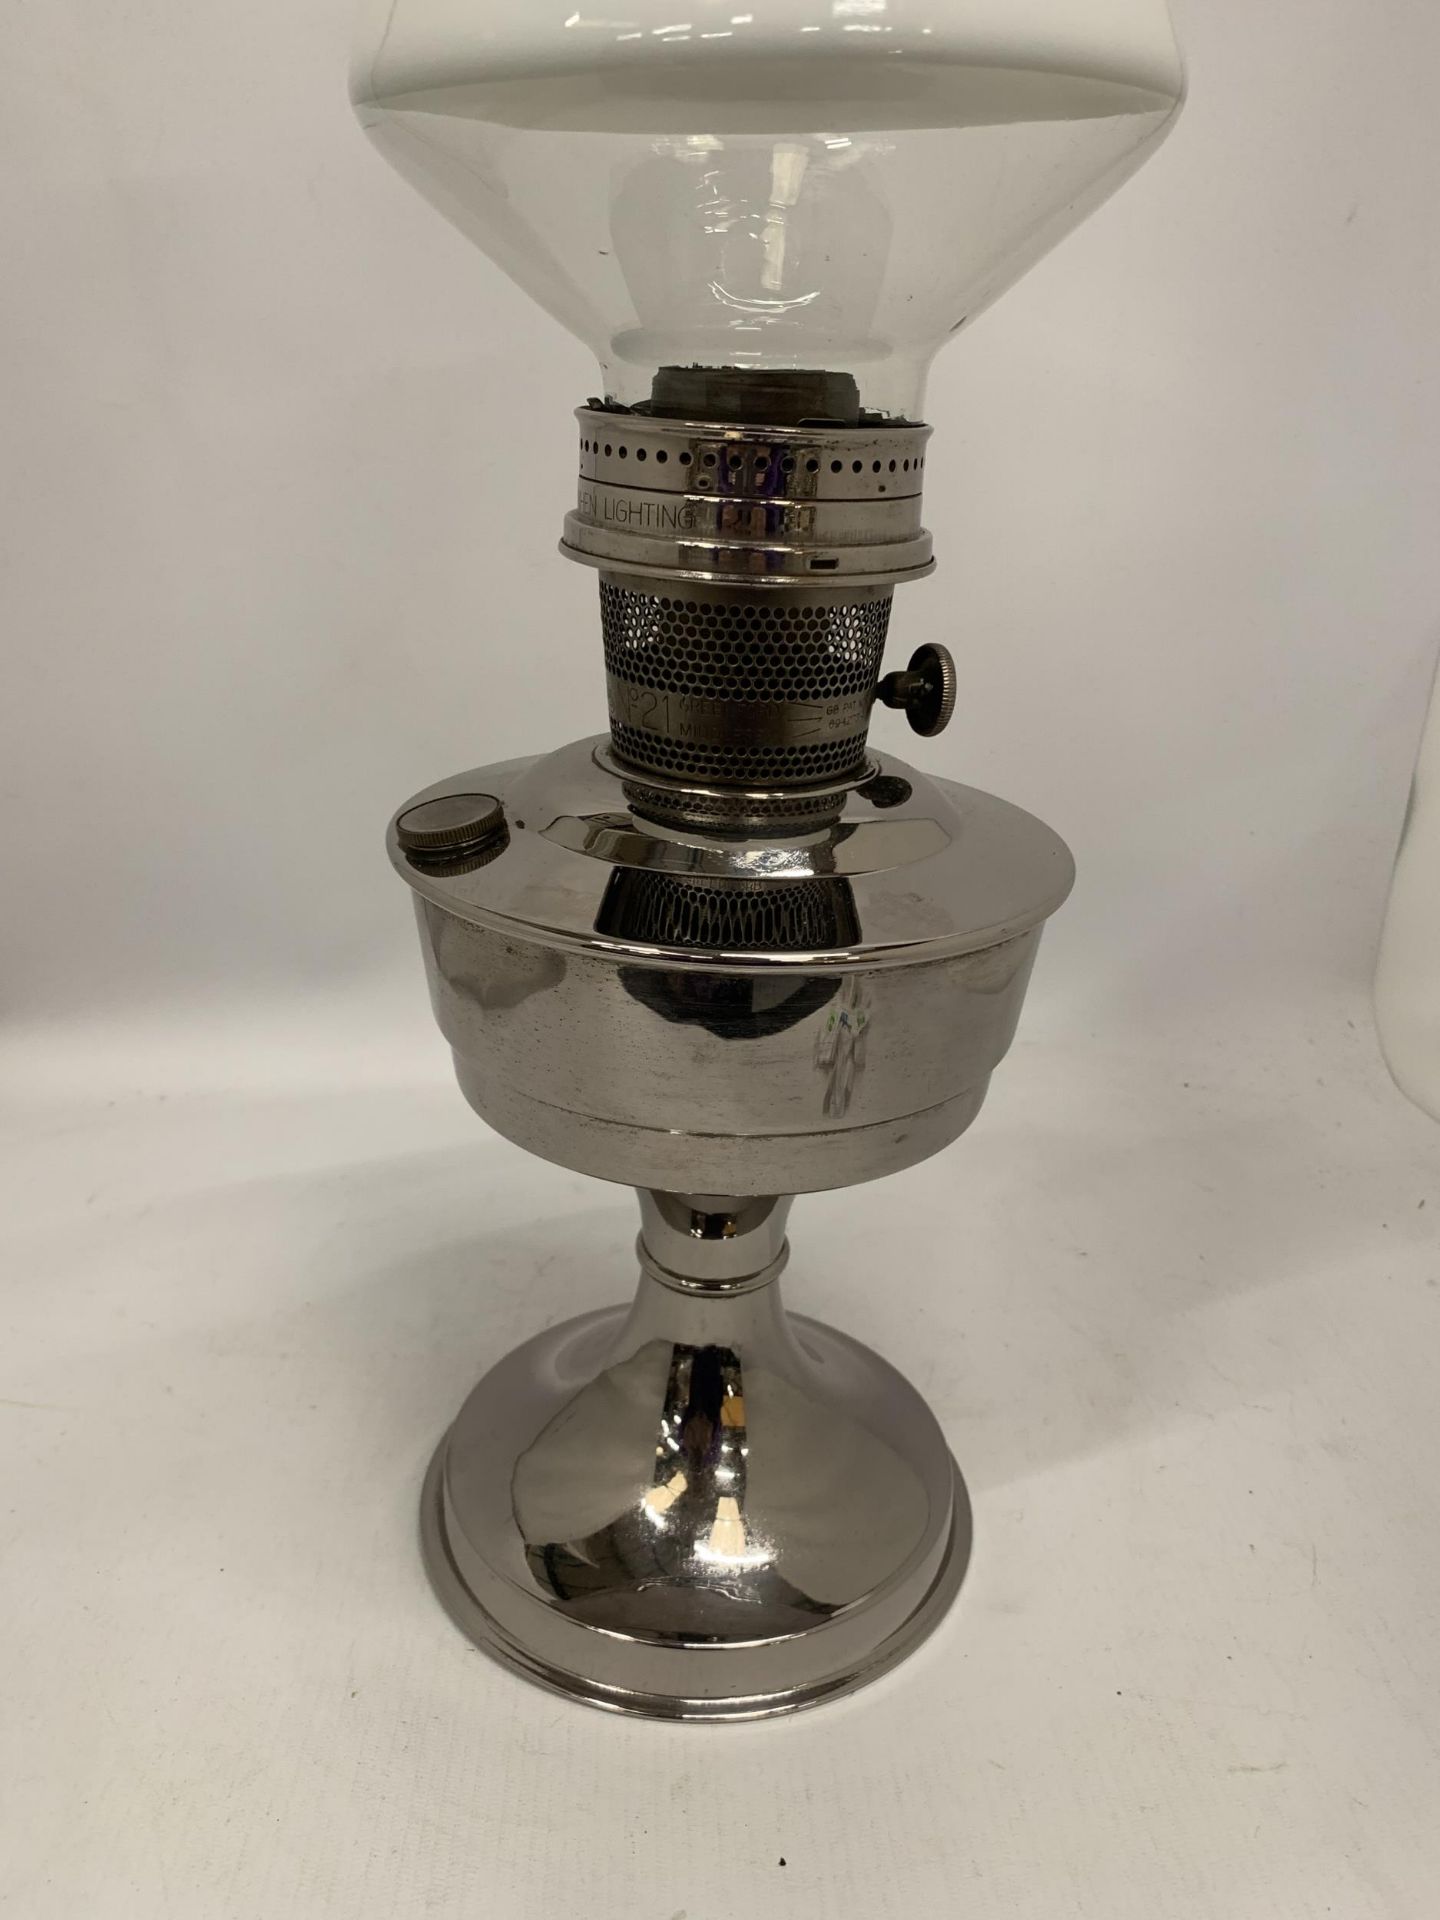 A VINTAGE STAINLESS STEEL EFFECT OIL LAMP - Image 2 of 2